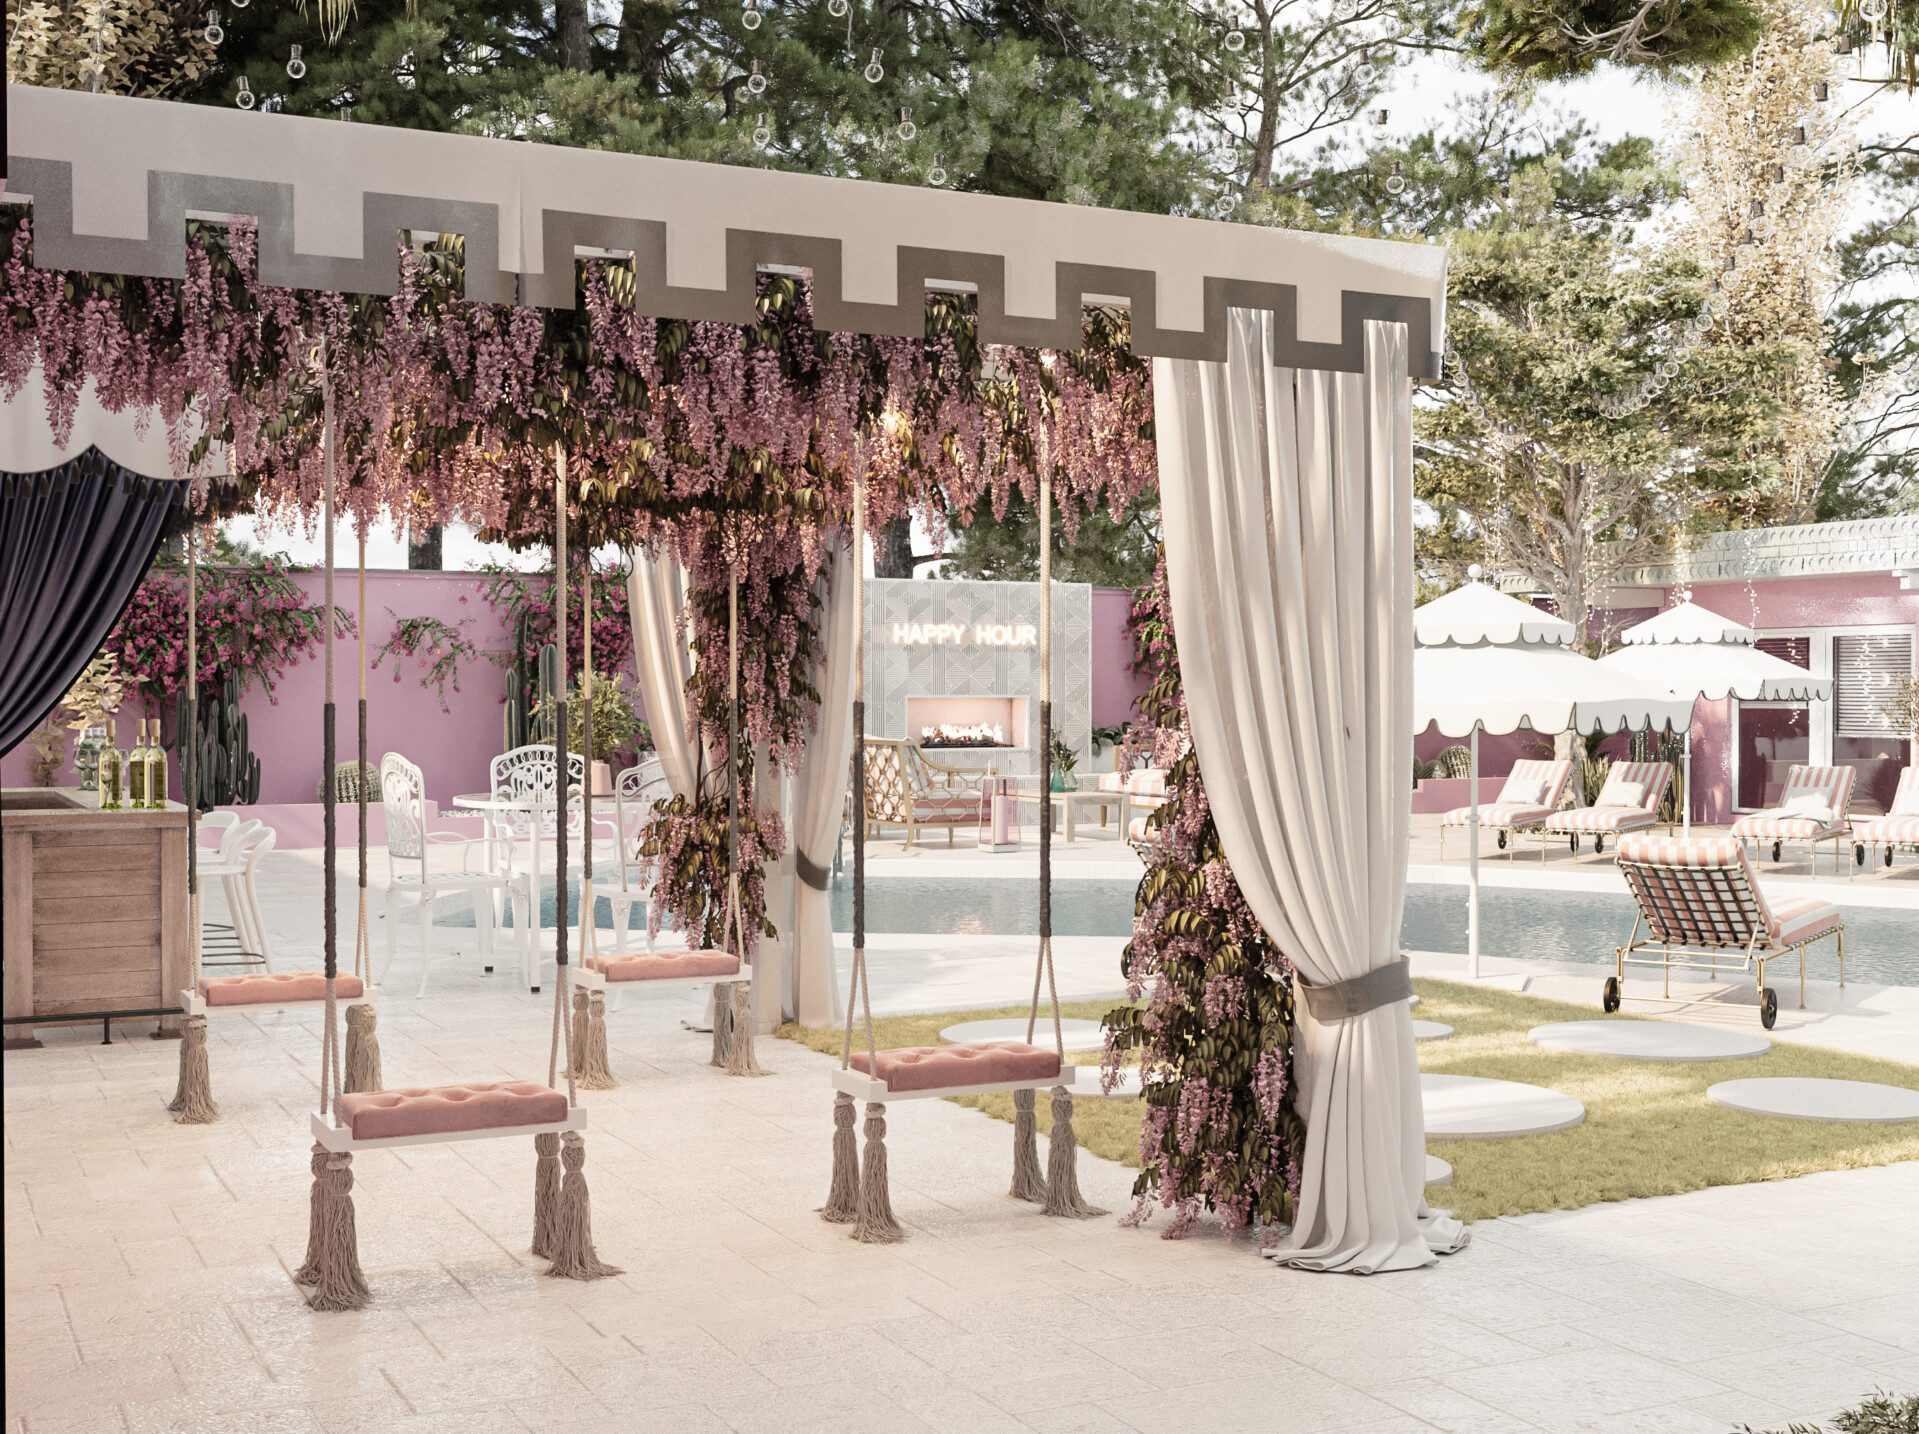 An outdoor luxury lounge area with hanging flower decorations, draped curtains, swings, and a "HAPPY HOUR" neon sign in the background near a pool with loungers and umbrellas.